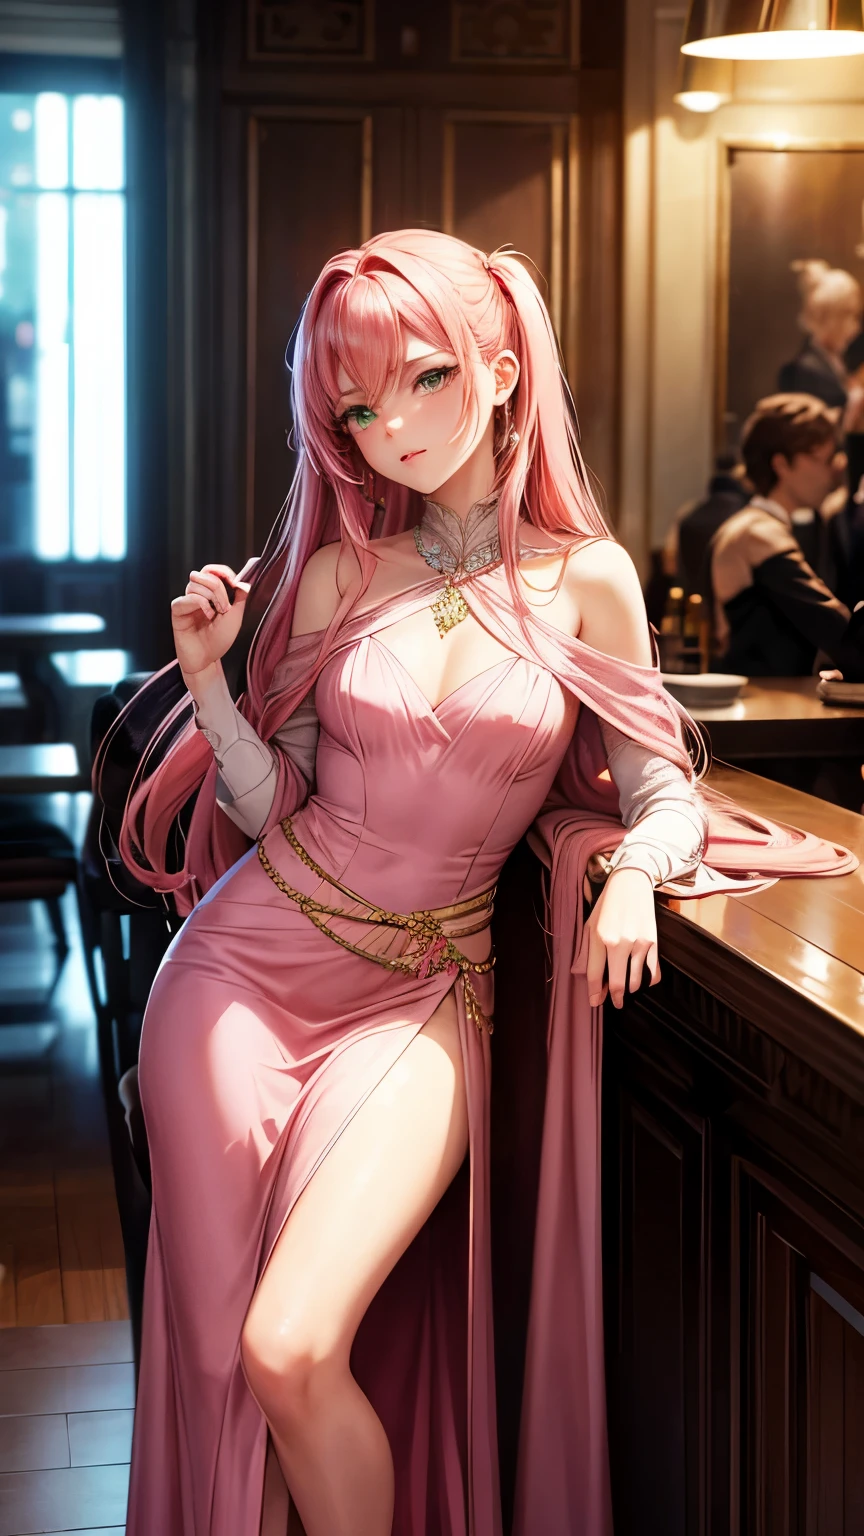 powerful woman, boss, looking like a goddess, small , with green eyes and long pink hair, sitting on a chair in the bar, wearing long elegant dress and heels, with men behind her